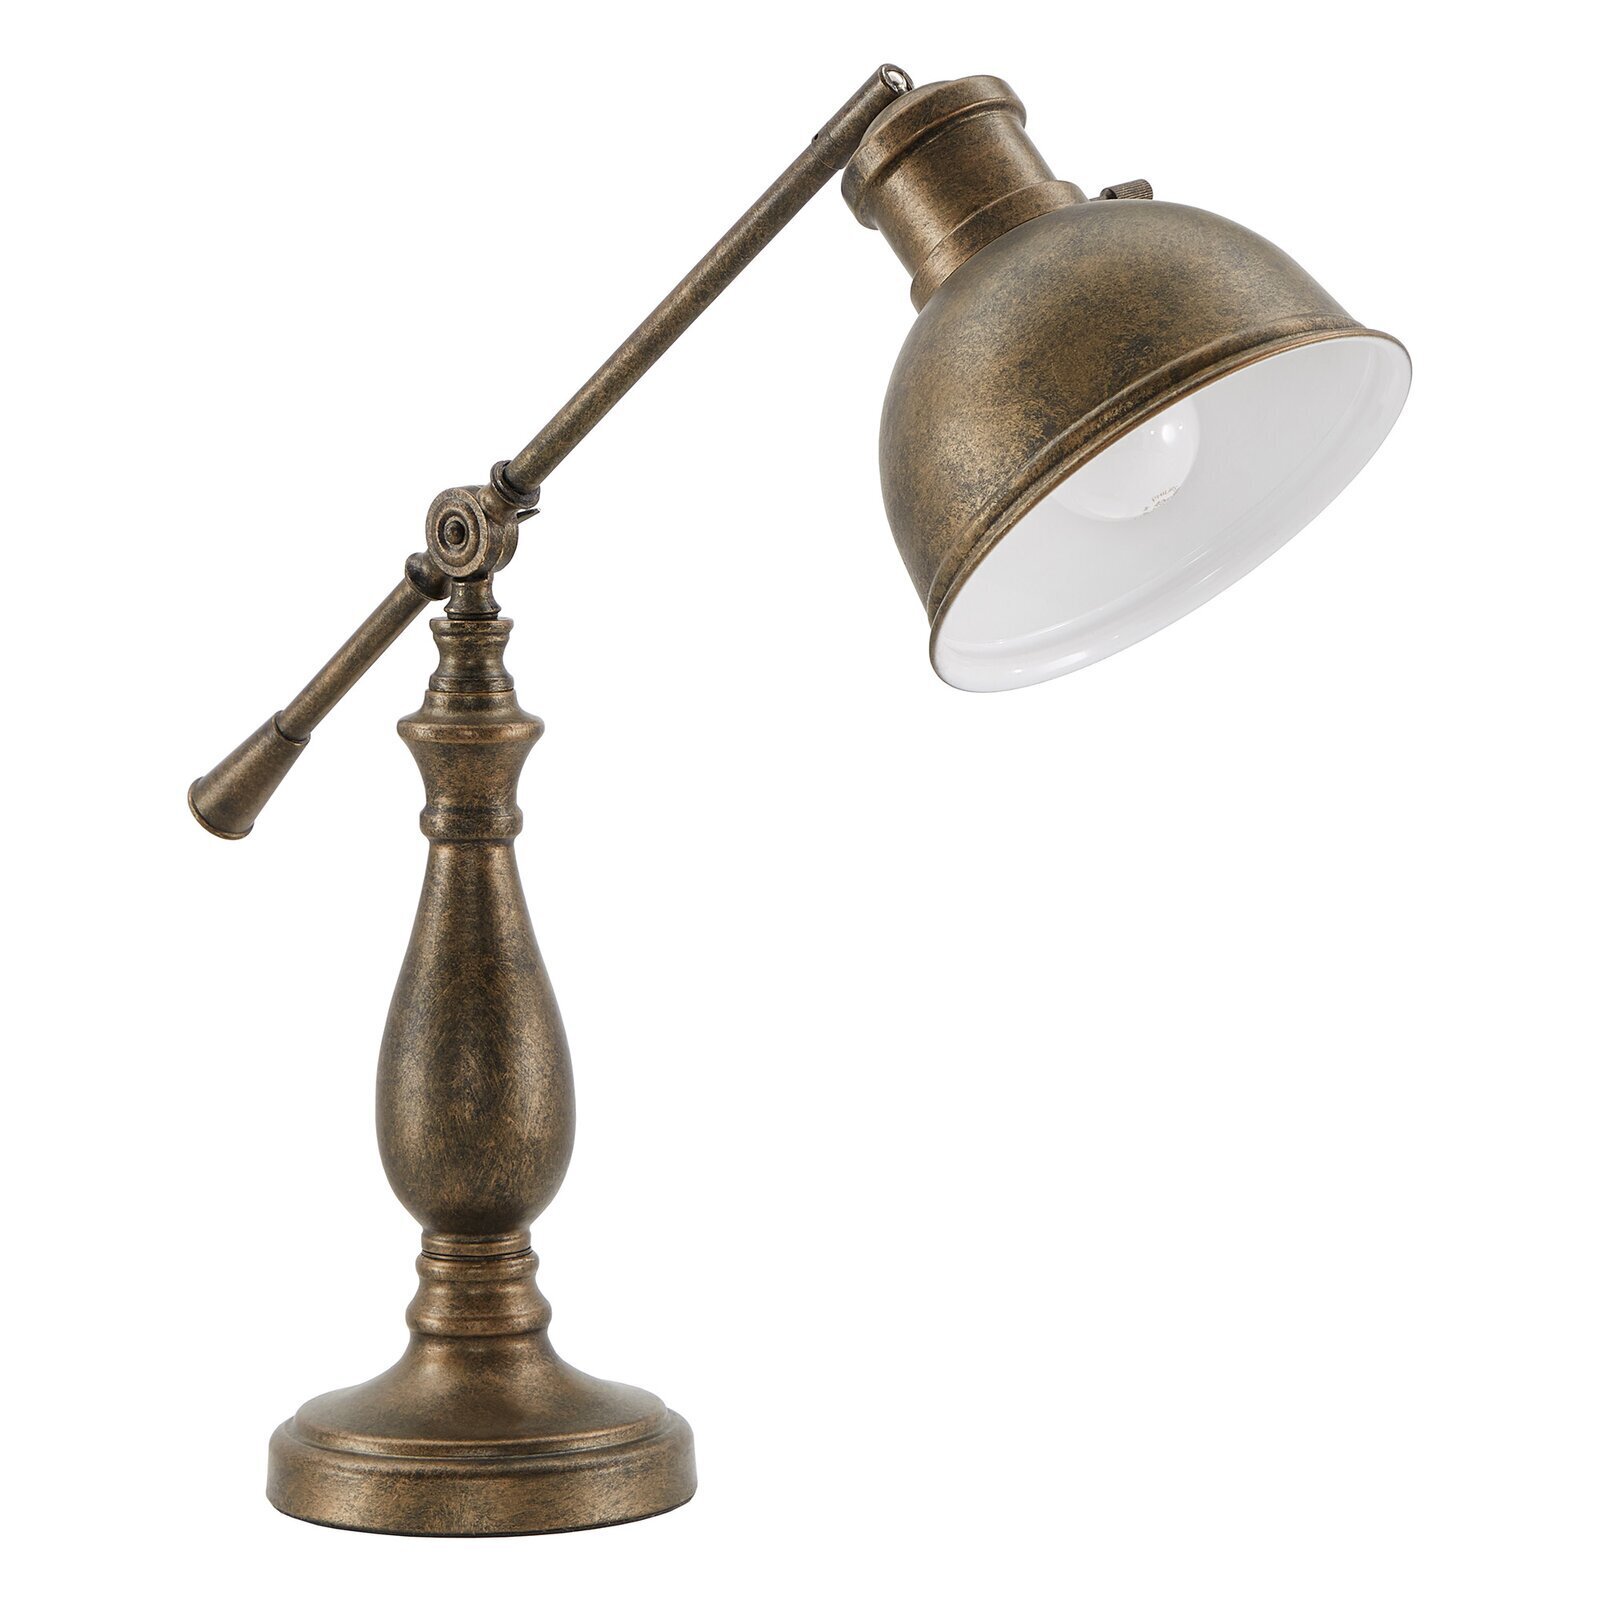 Brushed brass desk lamp with turned base